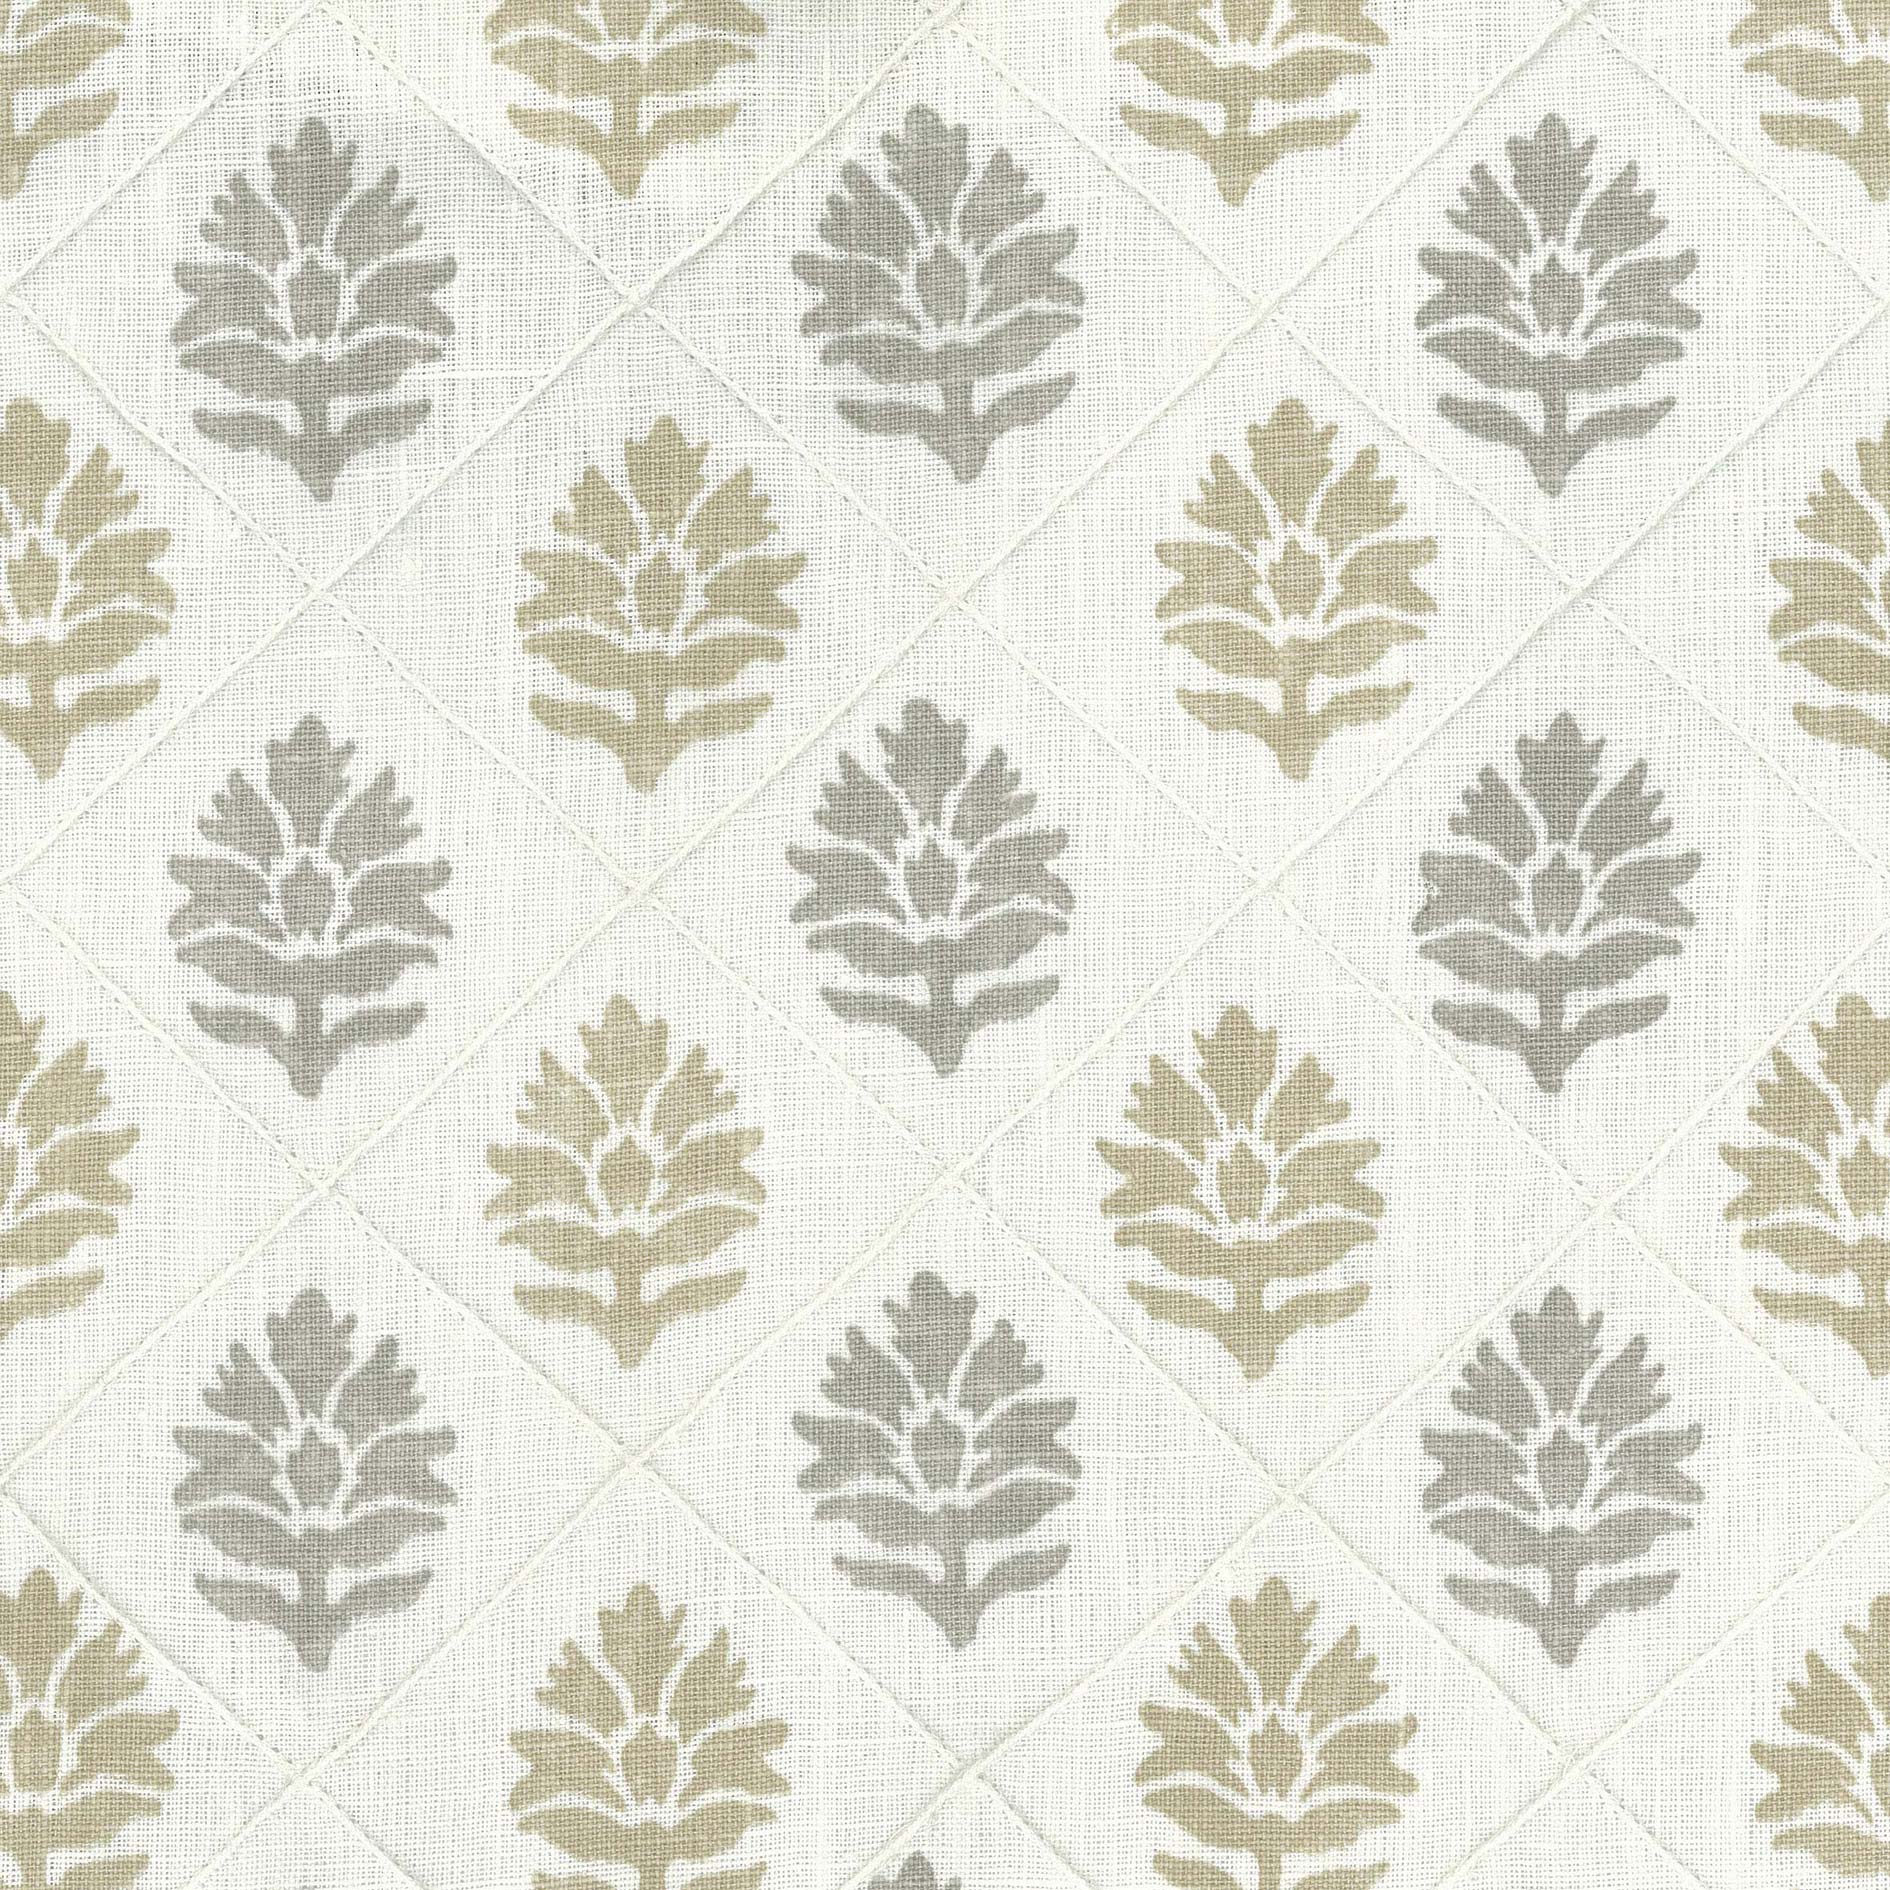 Nina Campbell Fabric - Les Rêves Camille Grey/Beige NCF4292-04